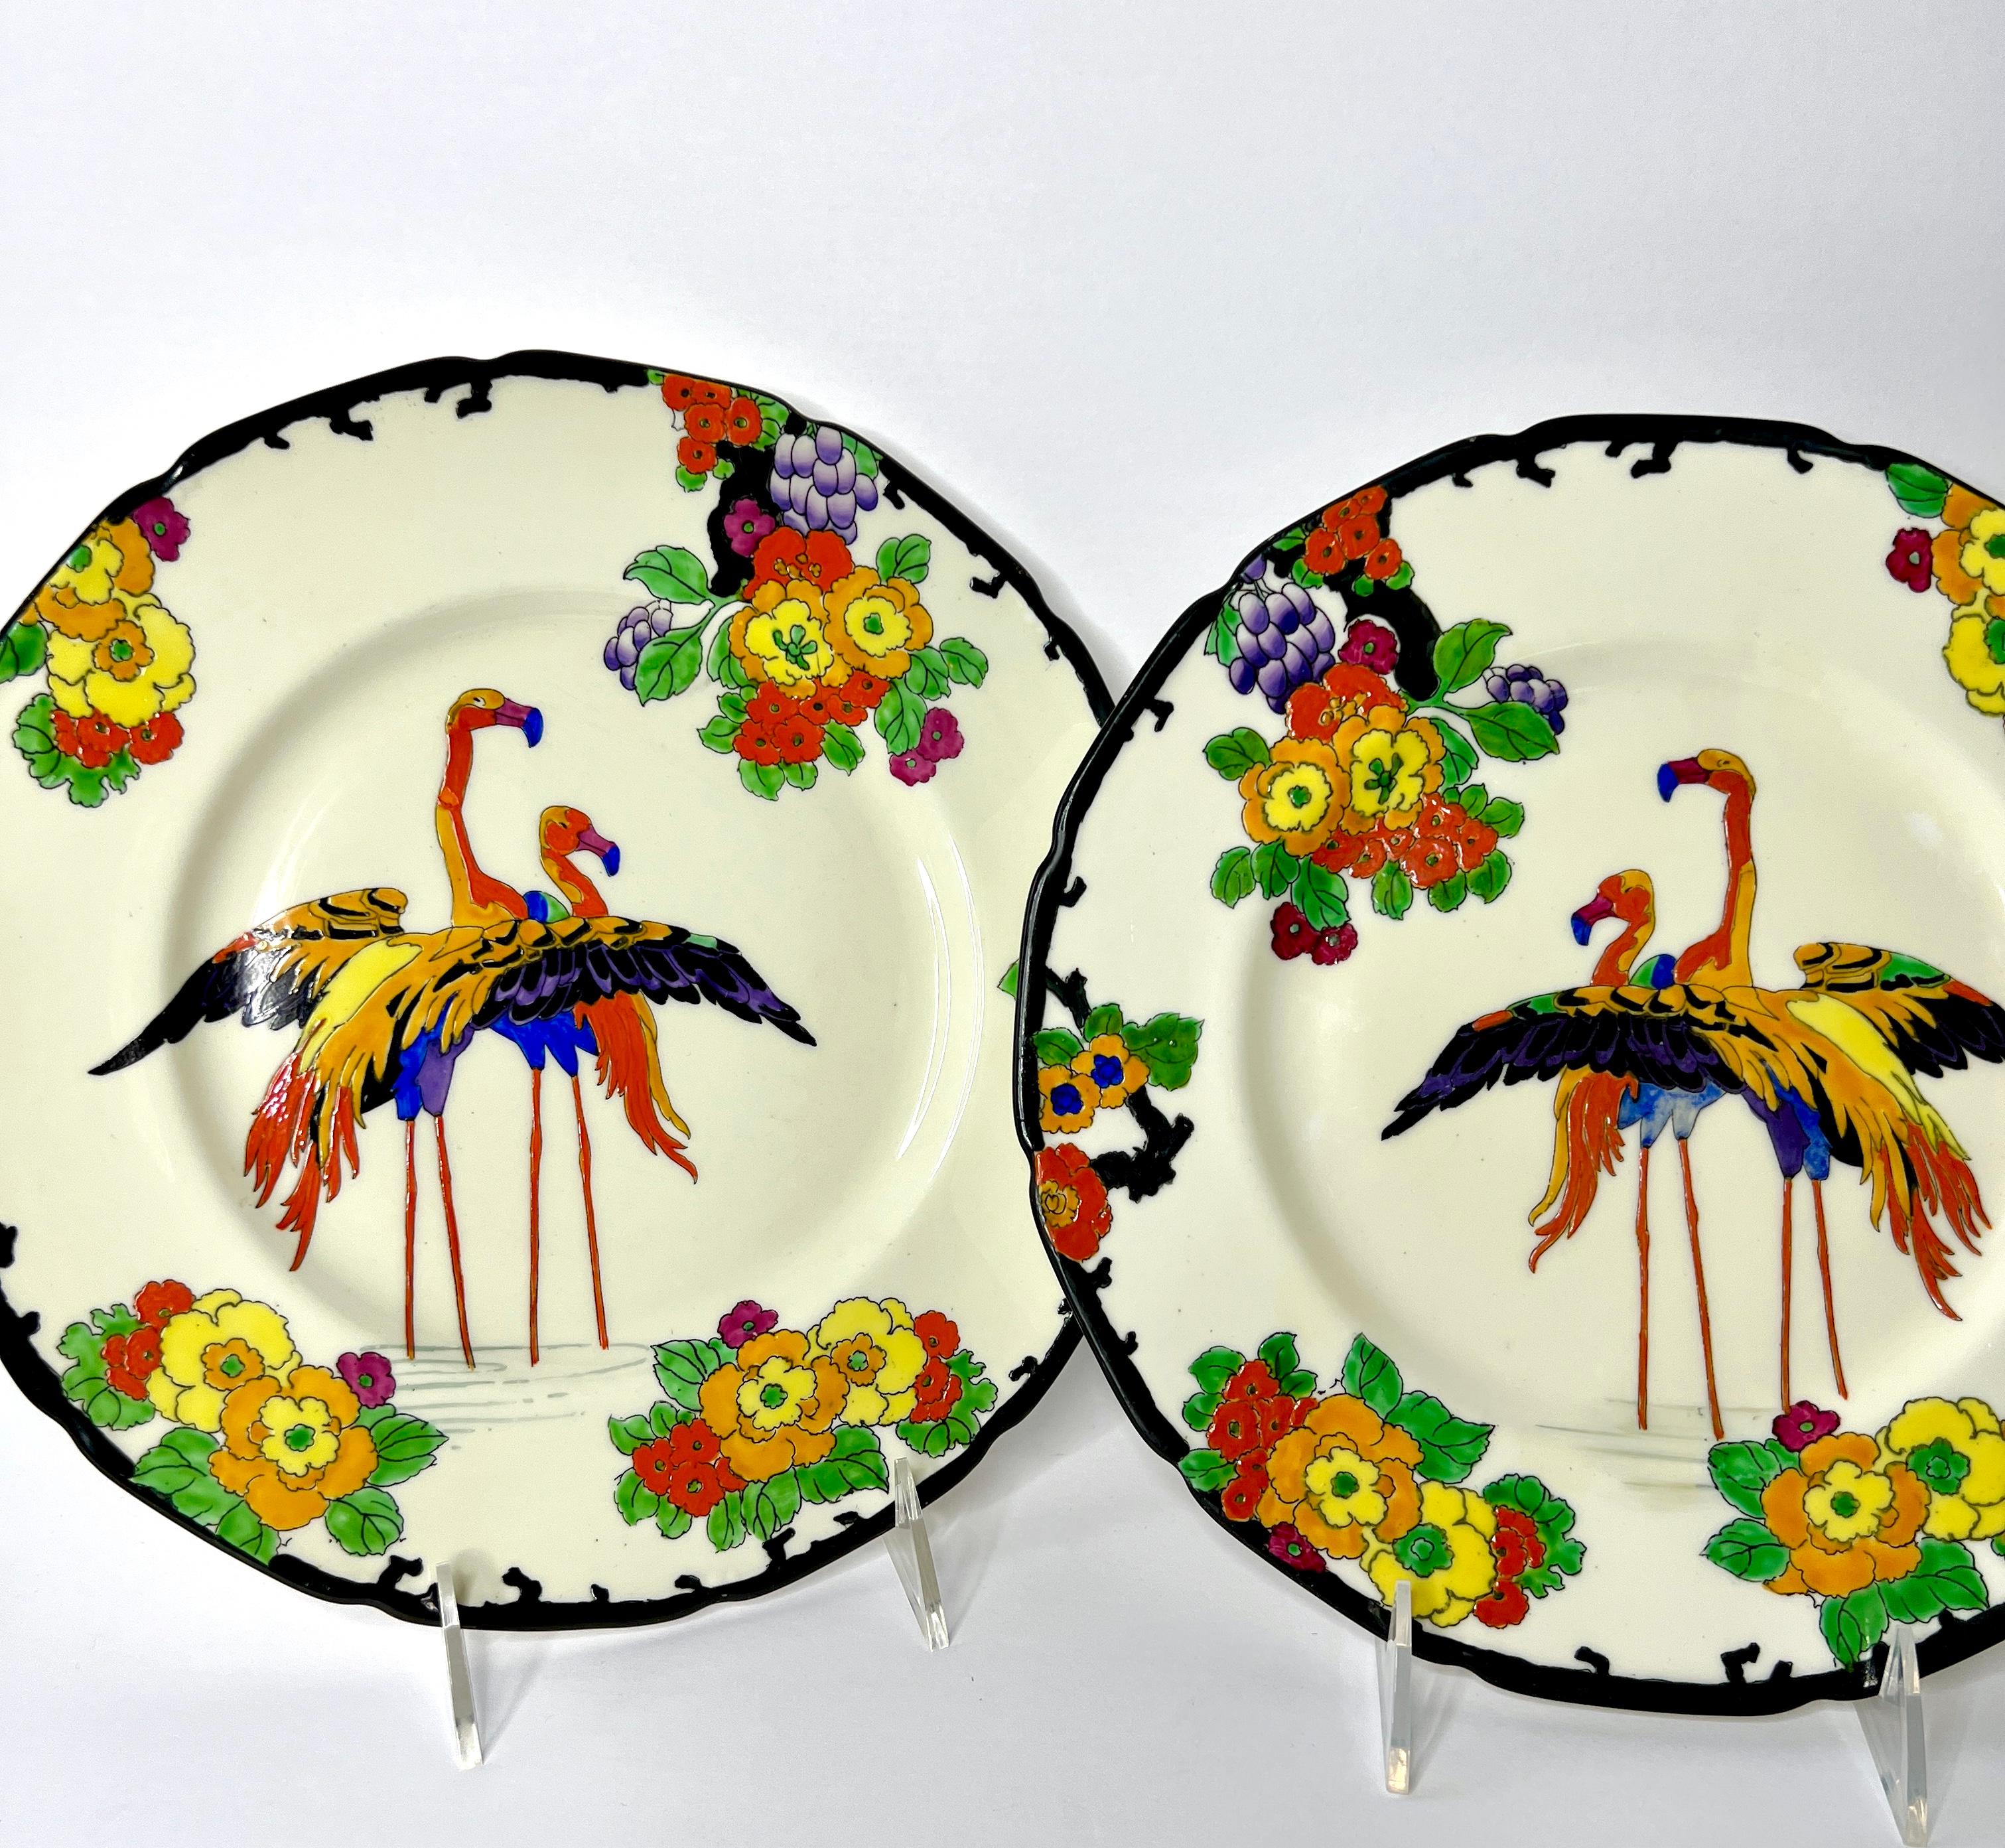 Designed by the iconic Robert Allen, head of the decorating department at Royal Doulton, this is a rare pattern and a full set of 12 Flamingo dinner plates. What sets them apart is that 4 of the plates have the flamingos facing each other which is